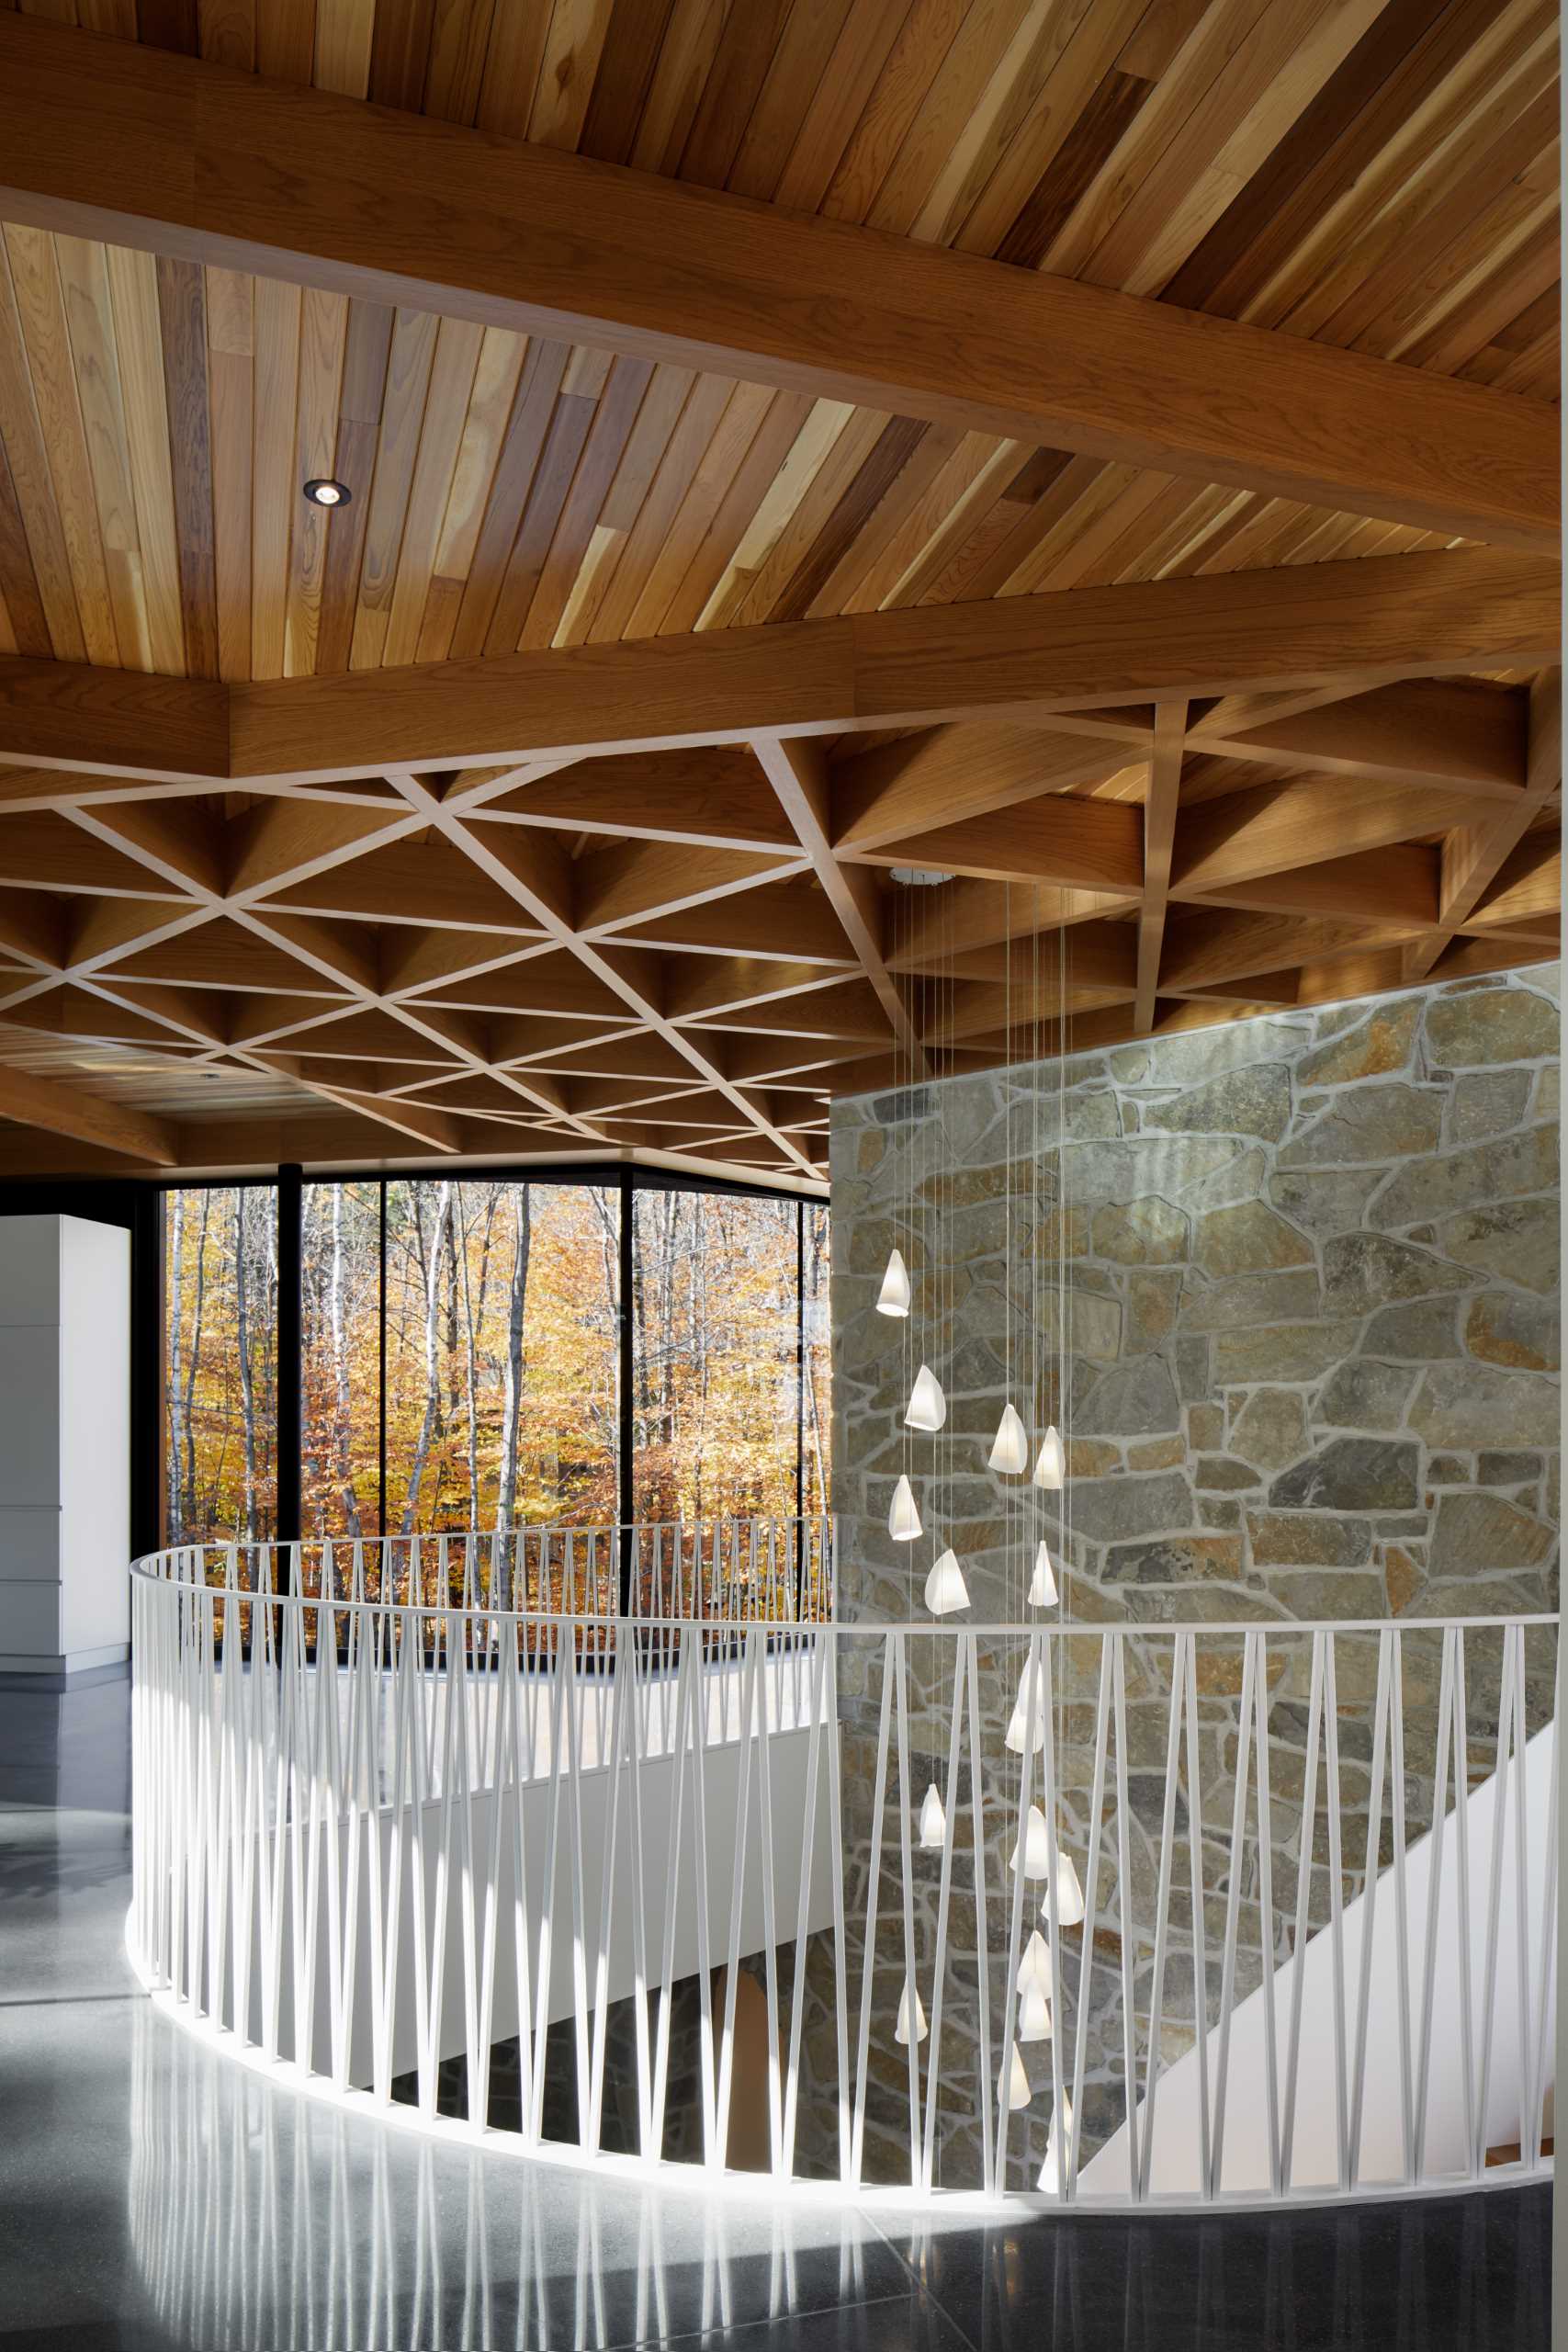 The ceiling of this modern home is covered with knot-free cedar slats, providing a warm and soft contrast to the black exterior. The cedar ceiling also extends outside into a screened room, accentuating the transparent effect.